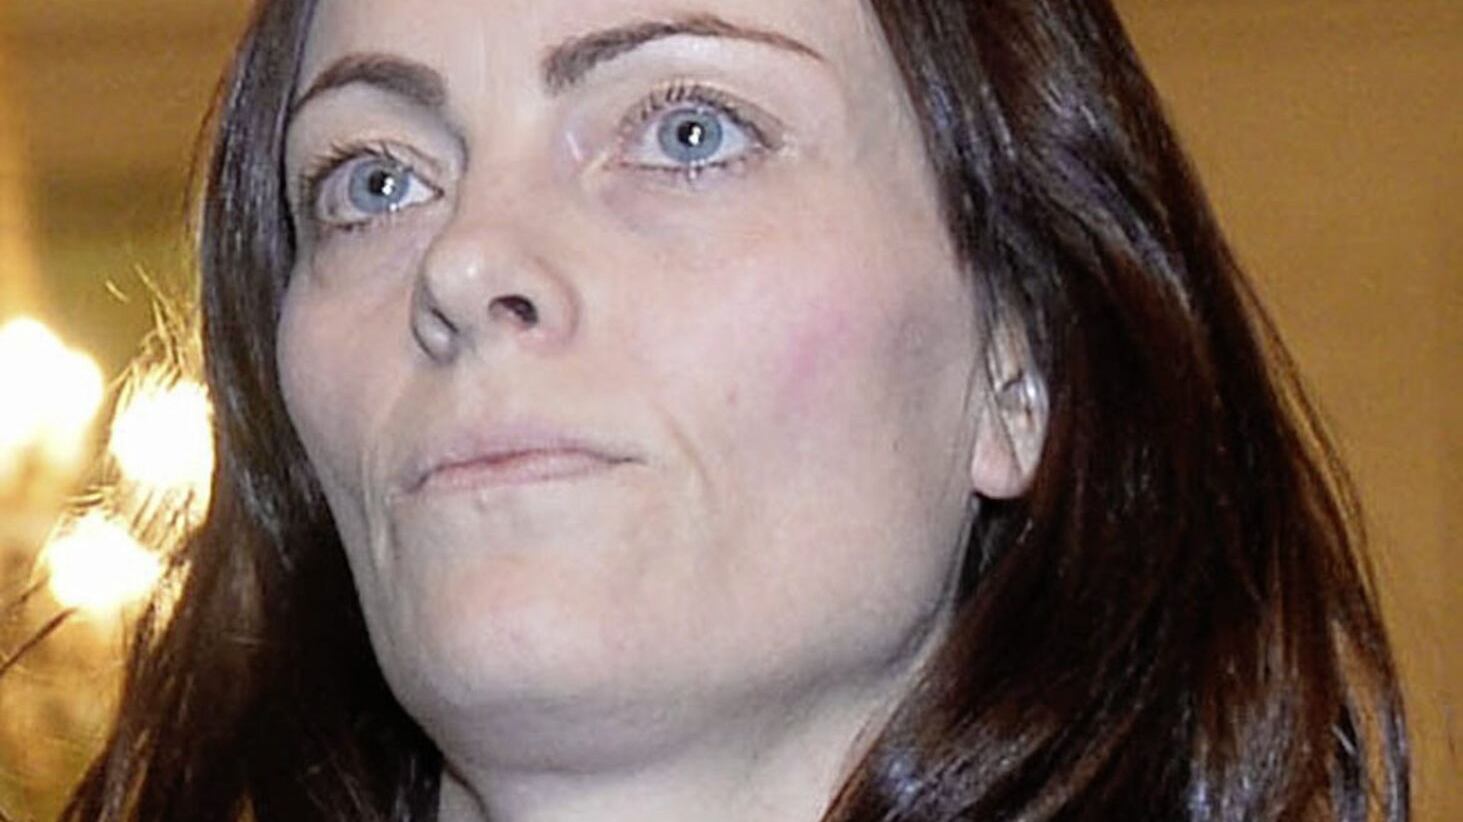 SDLP deputy leader Nichola Mallon said the neurology recall has been stressful for patients. Picture by Colm Lenaghan, Pacemaker Press 